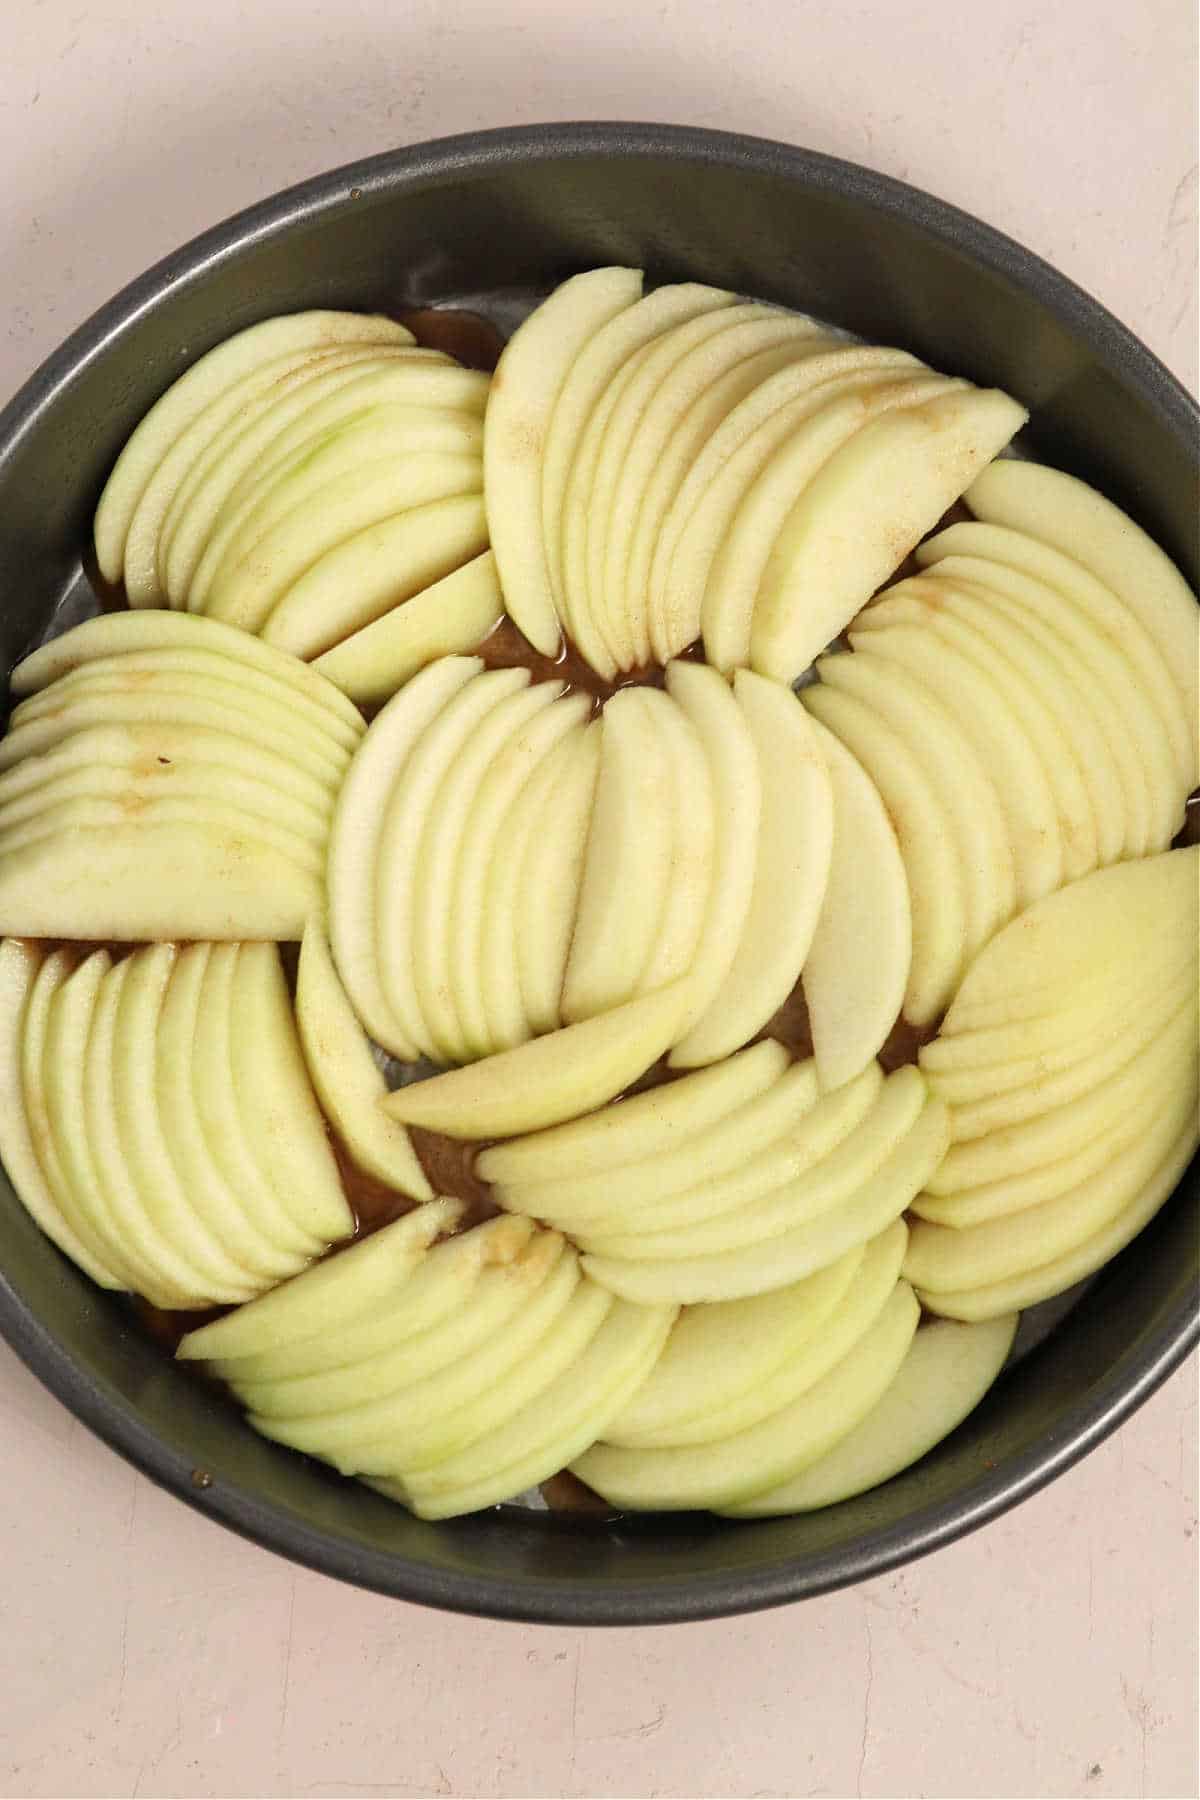 Peeled and thinly sliced apples arranged in a cake pan.